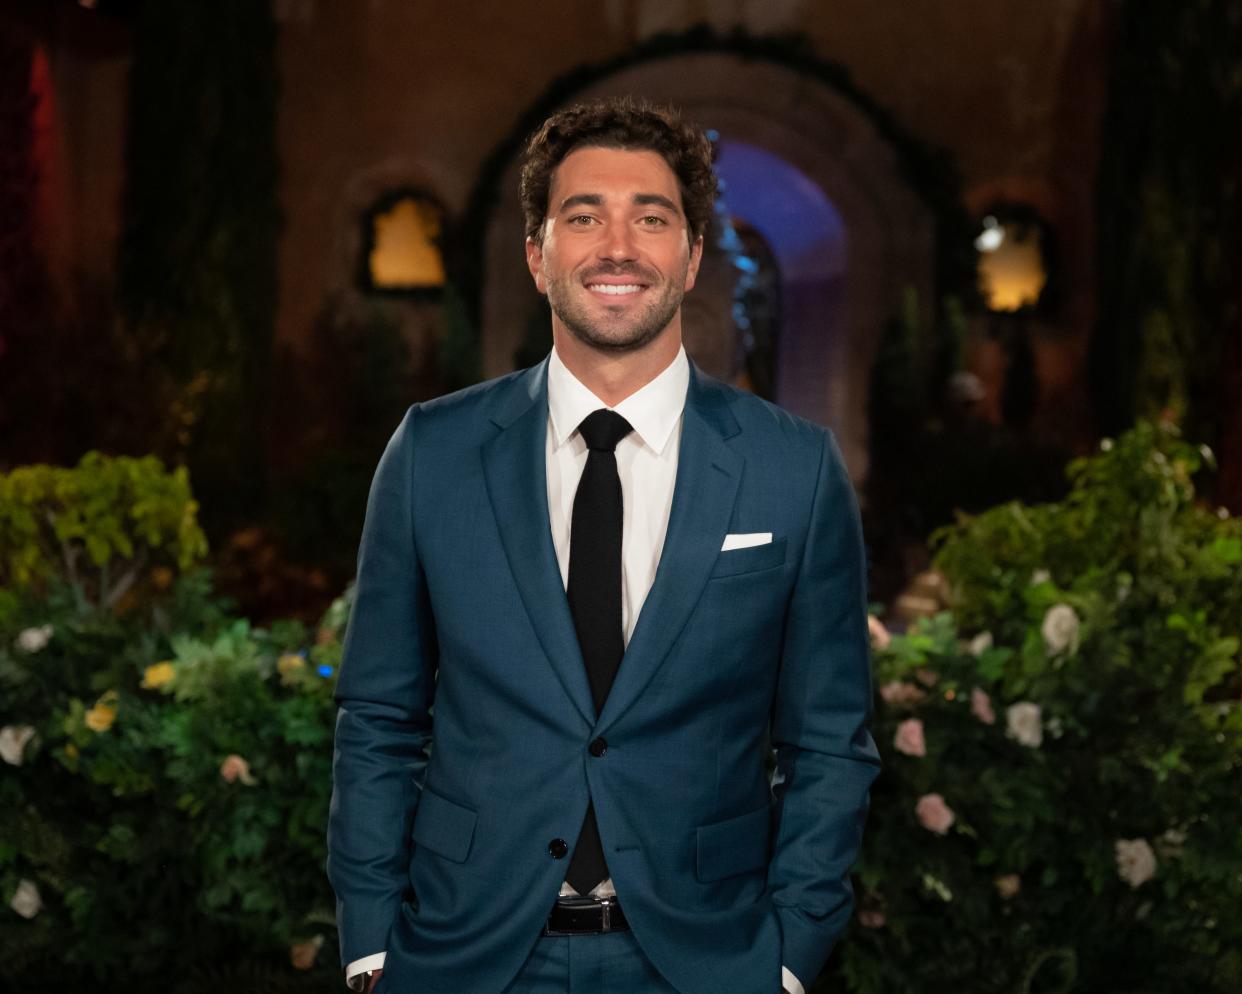 Who does Joey end up with on 'The Bachelor'? Fans have theories about